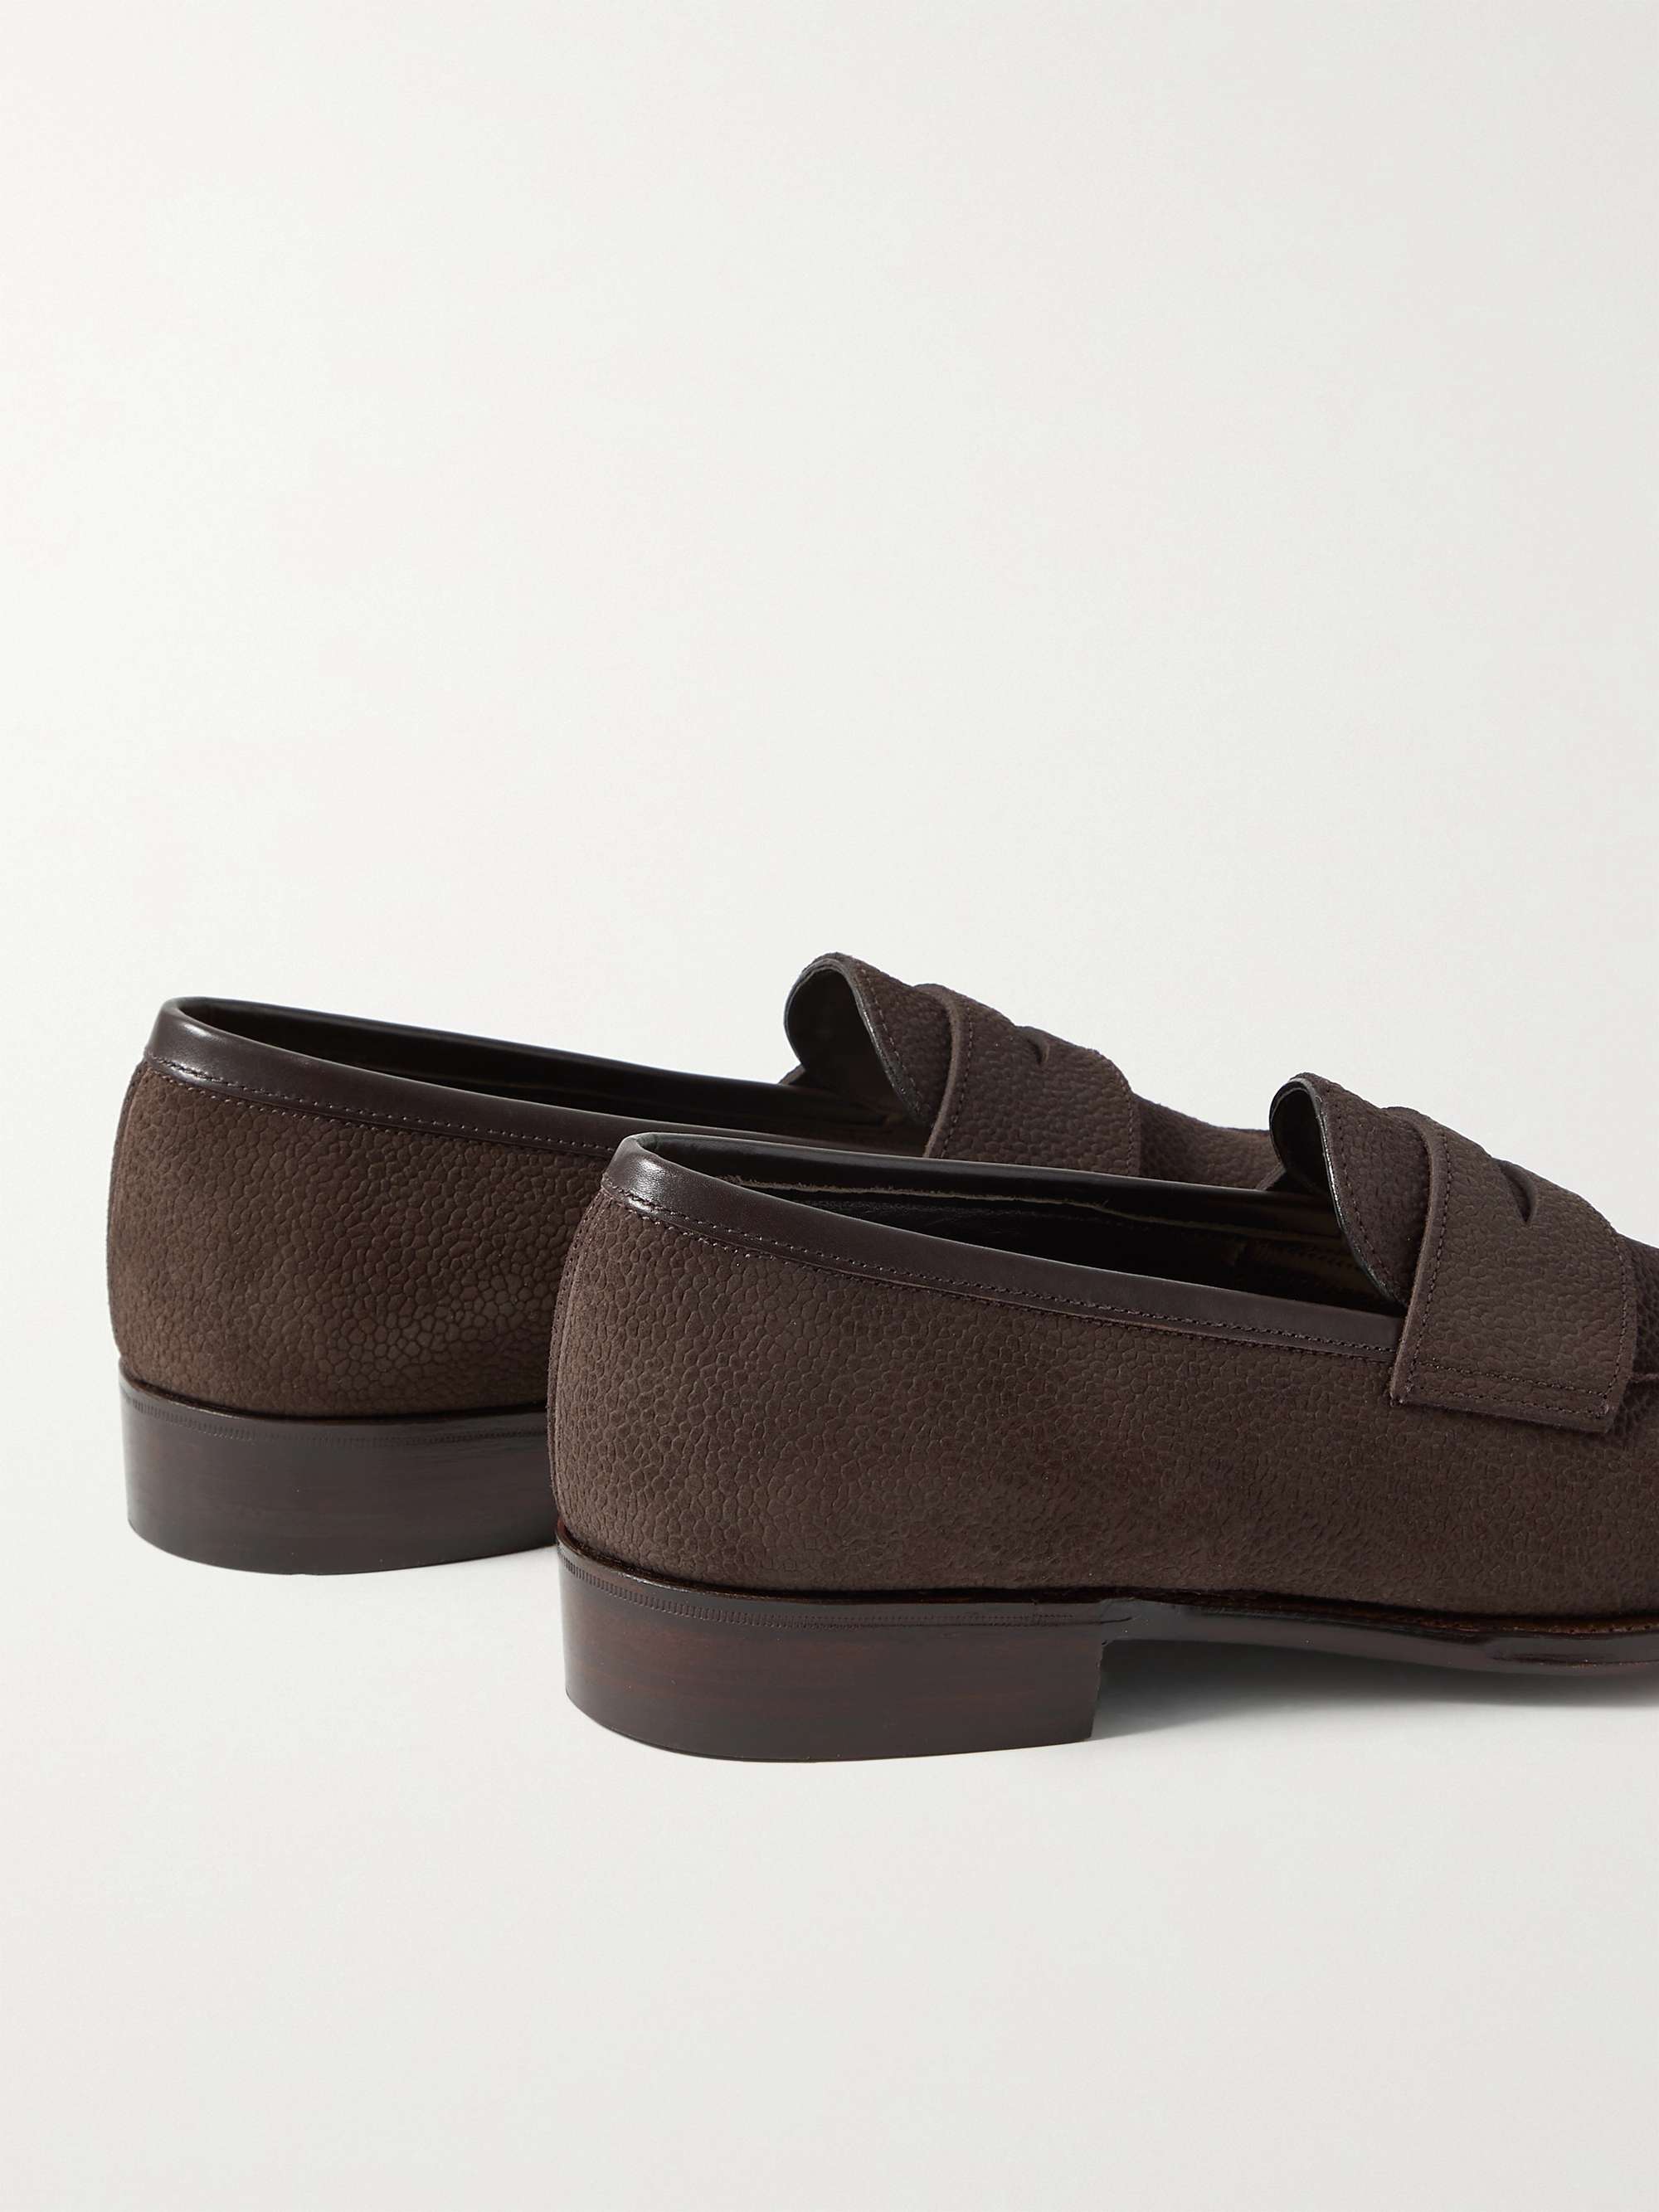 GEORGE CLEVERLEY Bradley III Leather-Trimmed Pebble-Grain Suede Penny Loafers